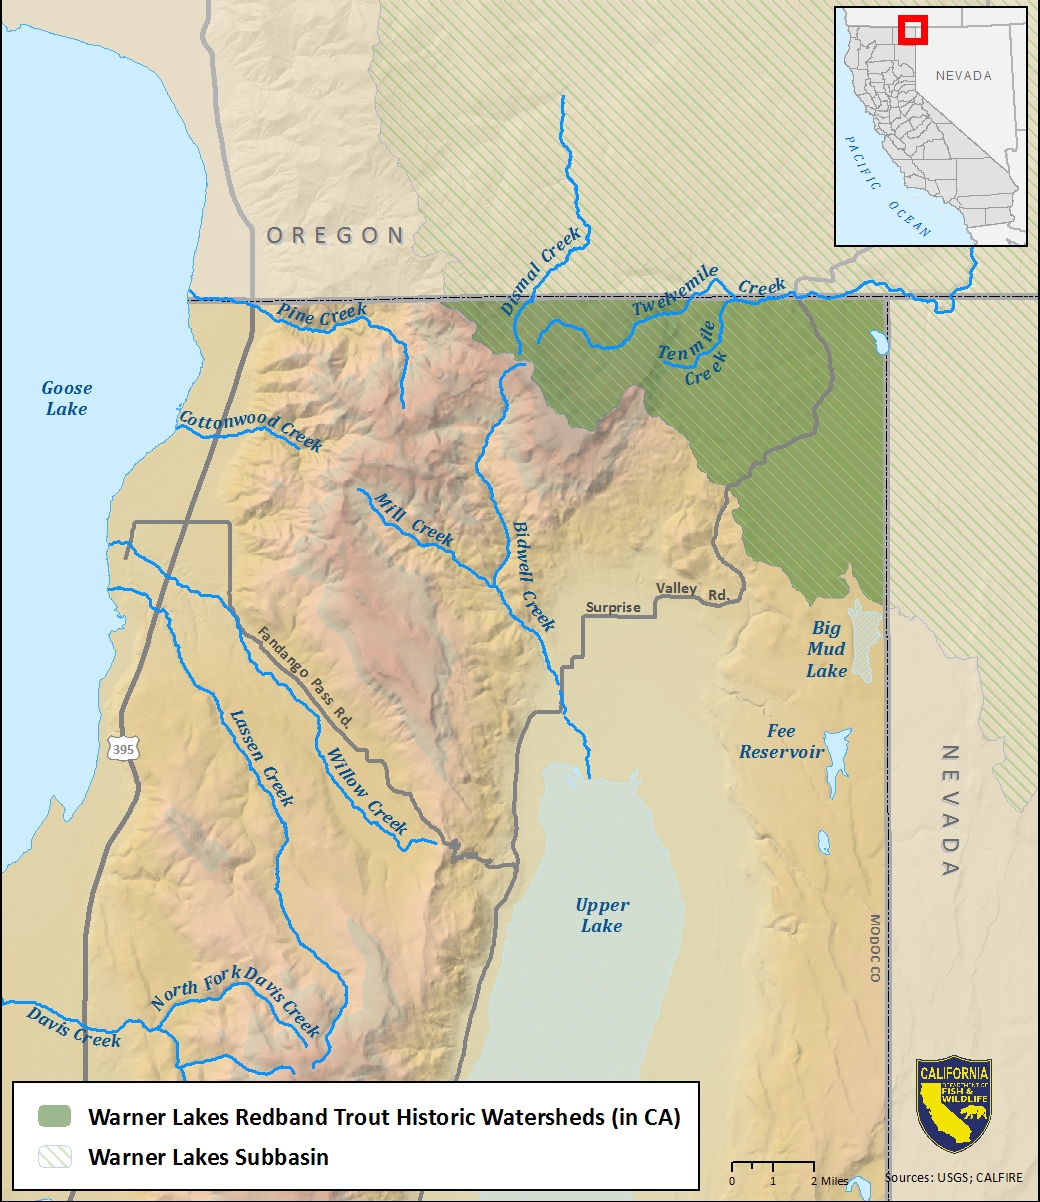 Map of Warner Lakes redband trout historic watershed-link opens in new window